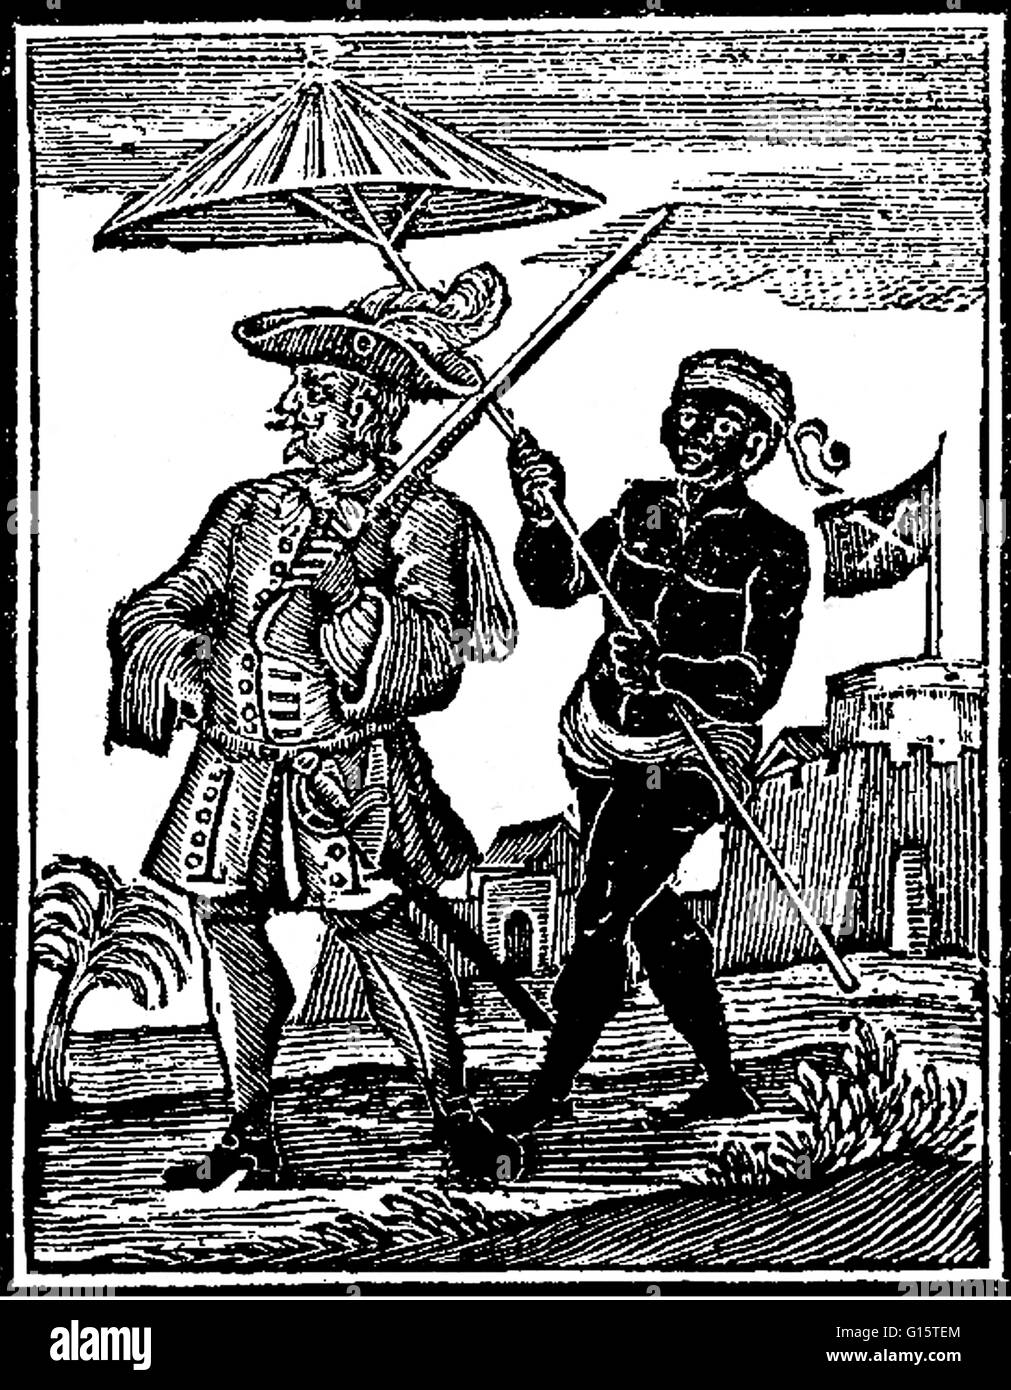 Henry Every (August 23, 1659 - after 1696) was an English pirate who operated in the Atlantic and Indian Oceans in the mid-1690s. He was one of the few major pirate captains to retire with his loot without being arrested or killed in battle. He was one of Stock Photo